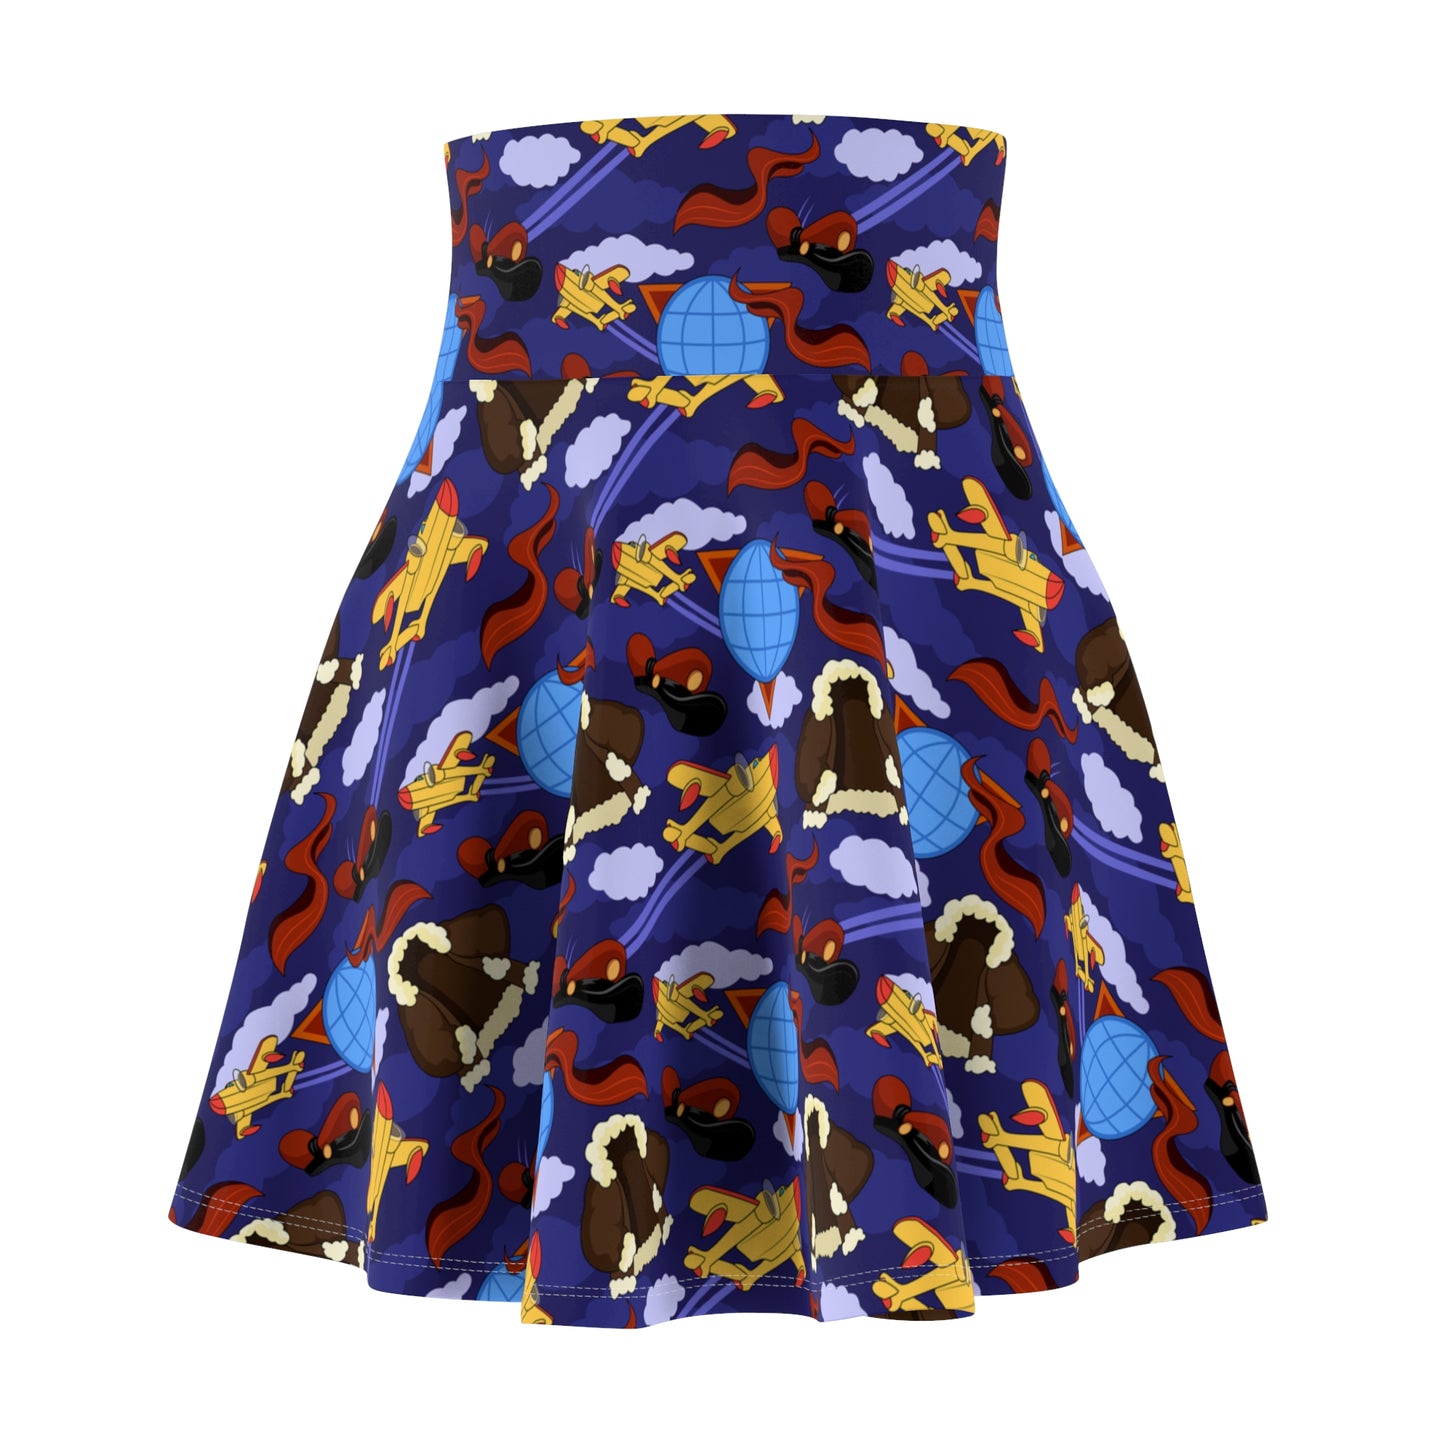 Another Tale To Spin Women's Skater Skirt